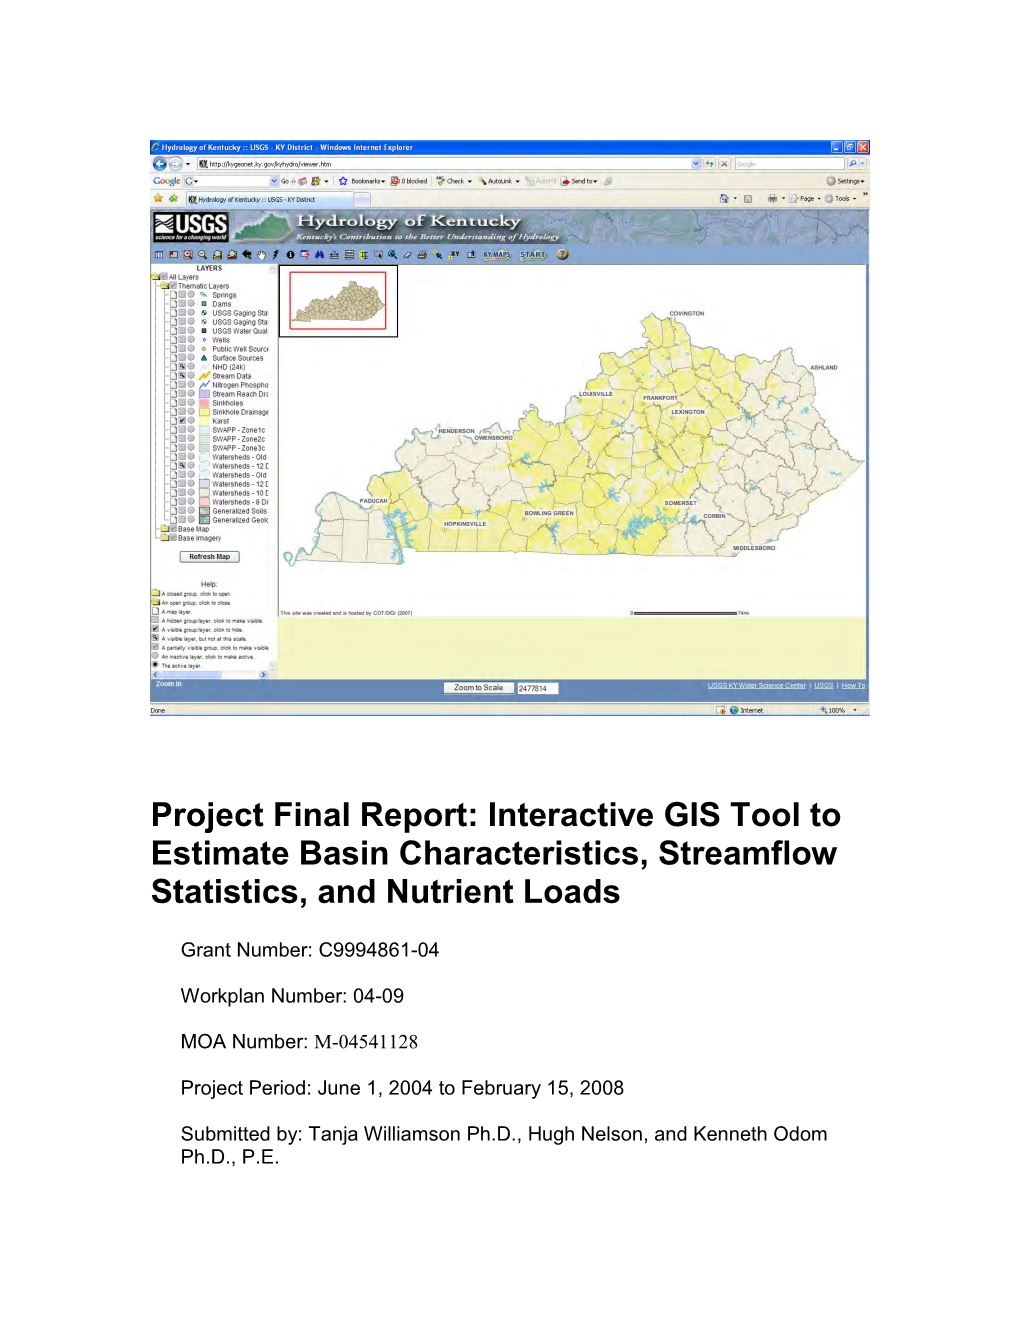 Interactive GIS Tool to Estimate Basin Characteristics, Streamflow Statistics, and Nutrient Loads